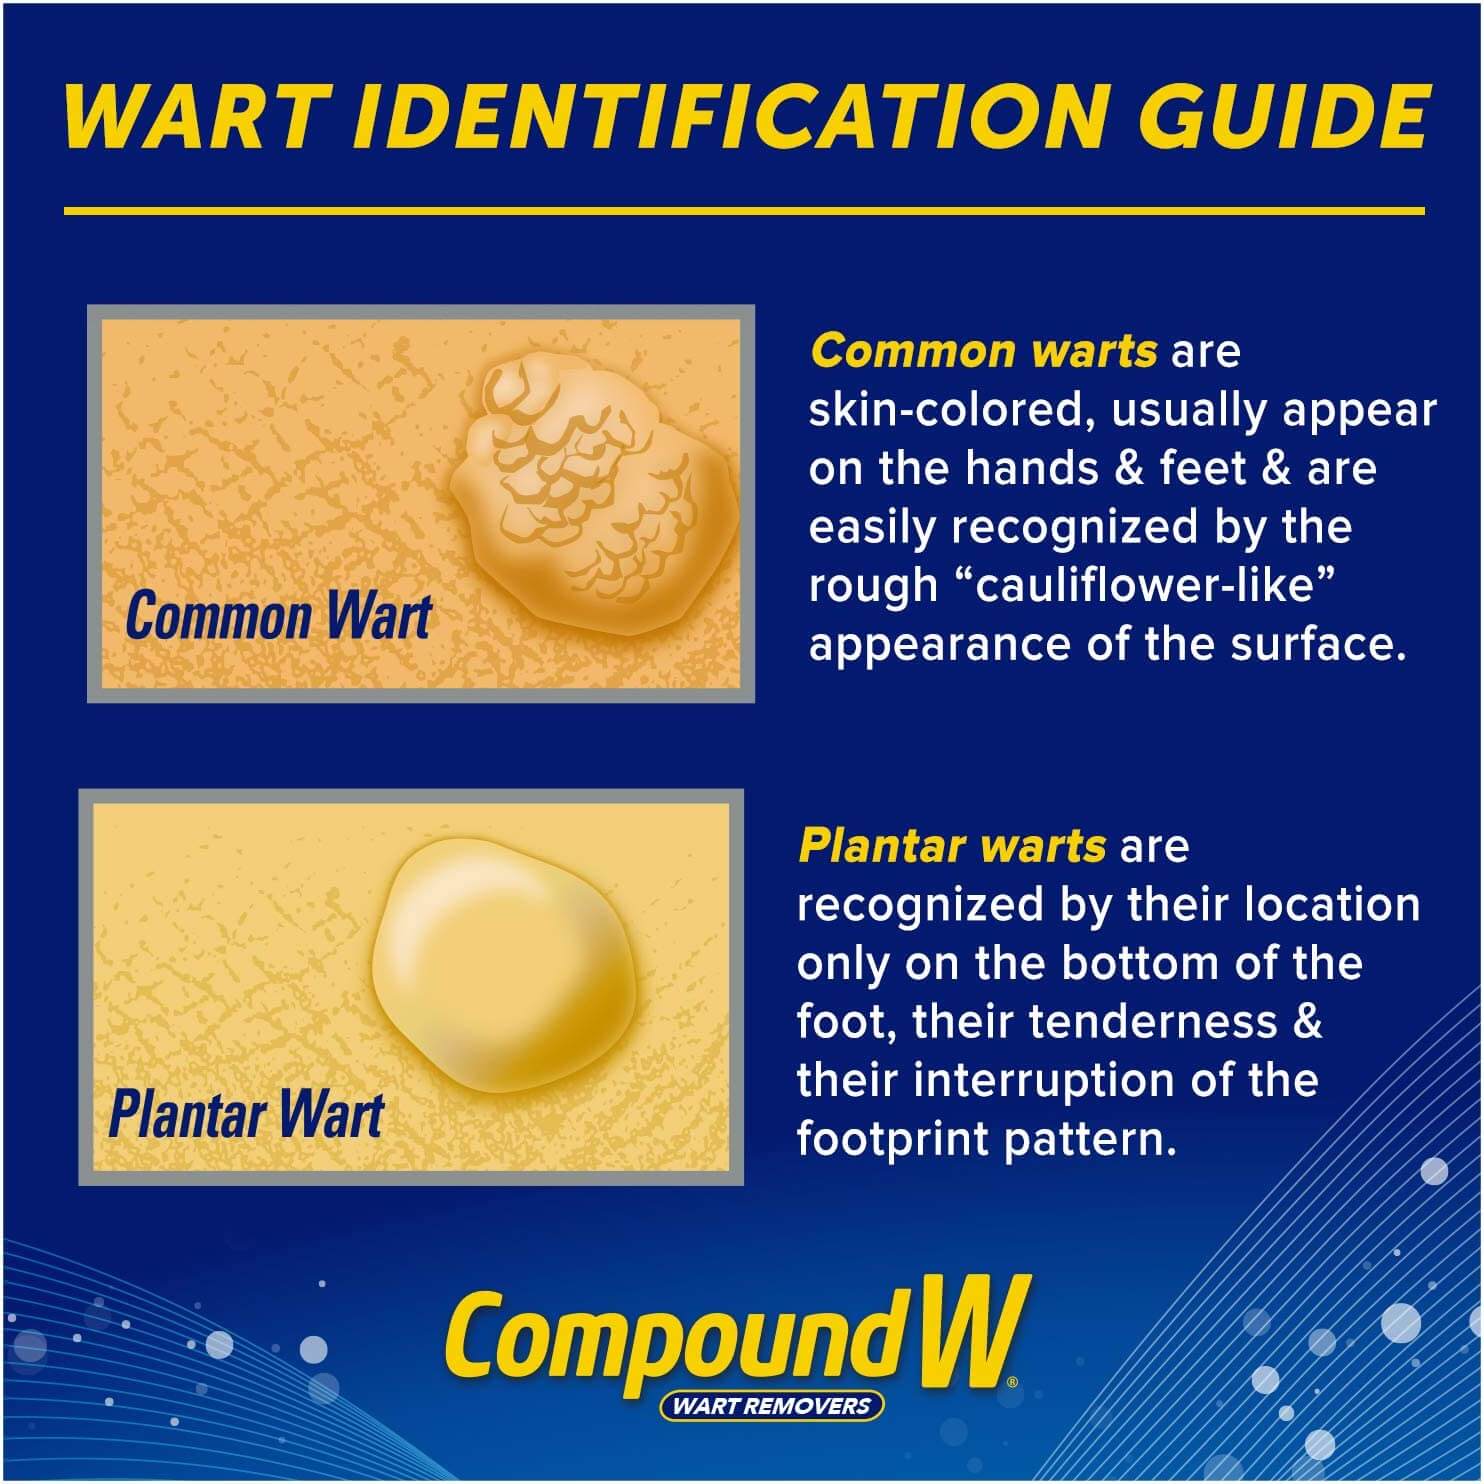 Compound W Freeze Off, Maximum Strength Wart Removal System, For Removal of  Common Warts and Plantar Warts, 12 Treatments - Care and Shop